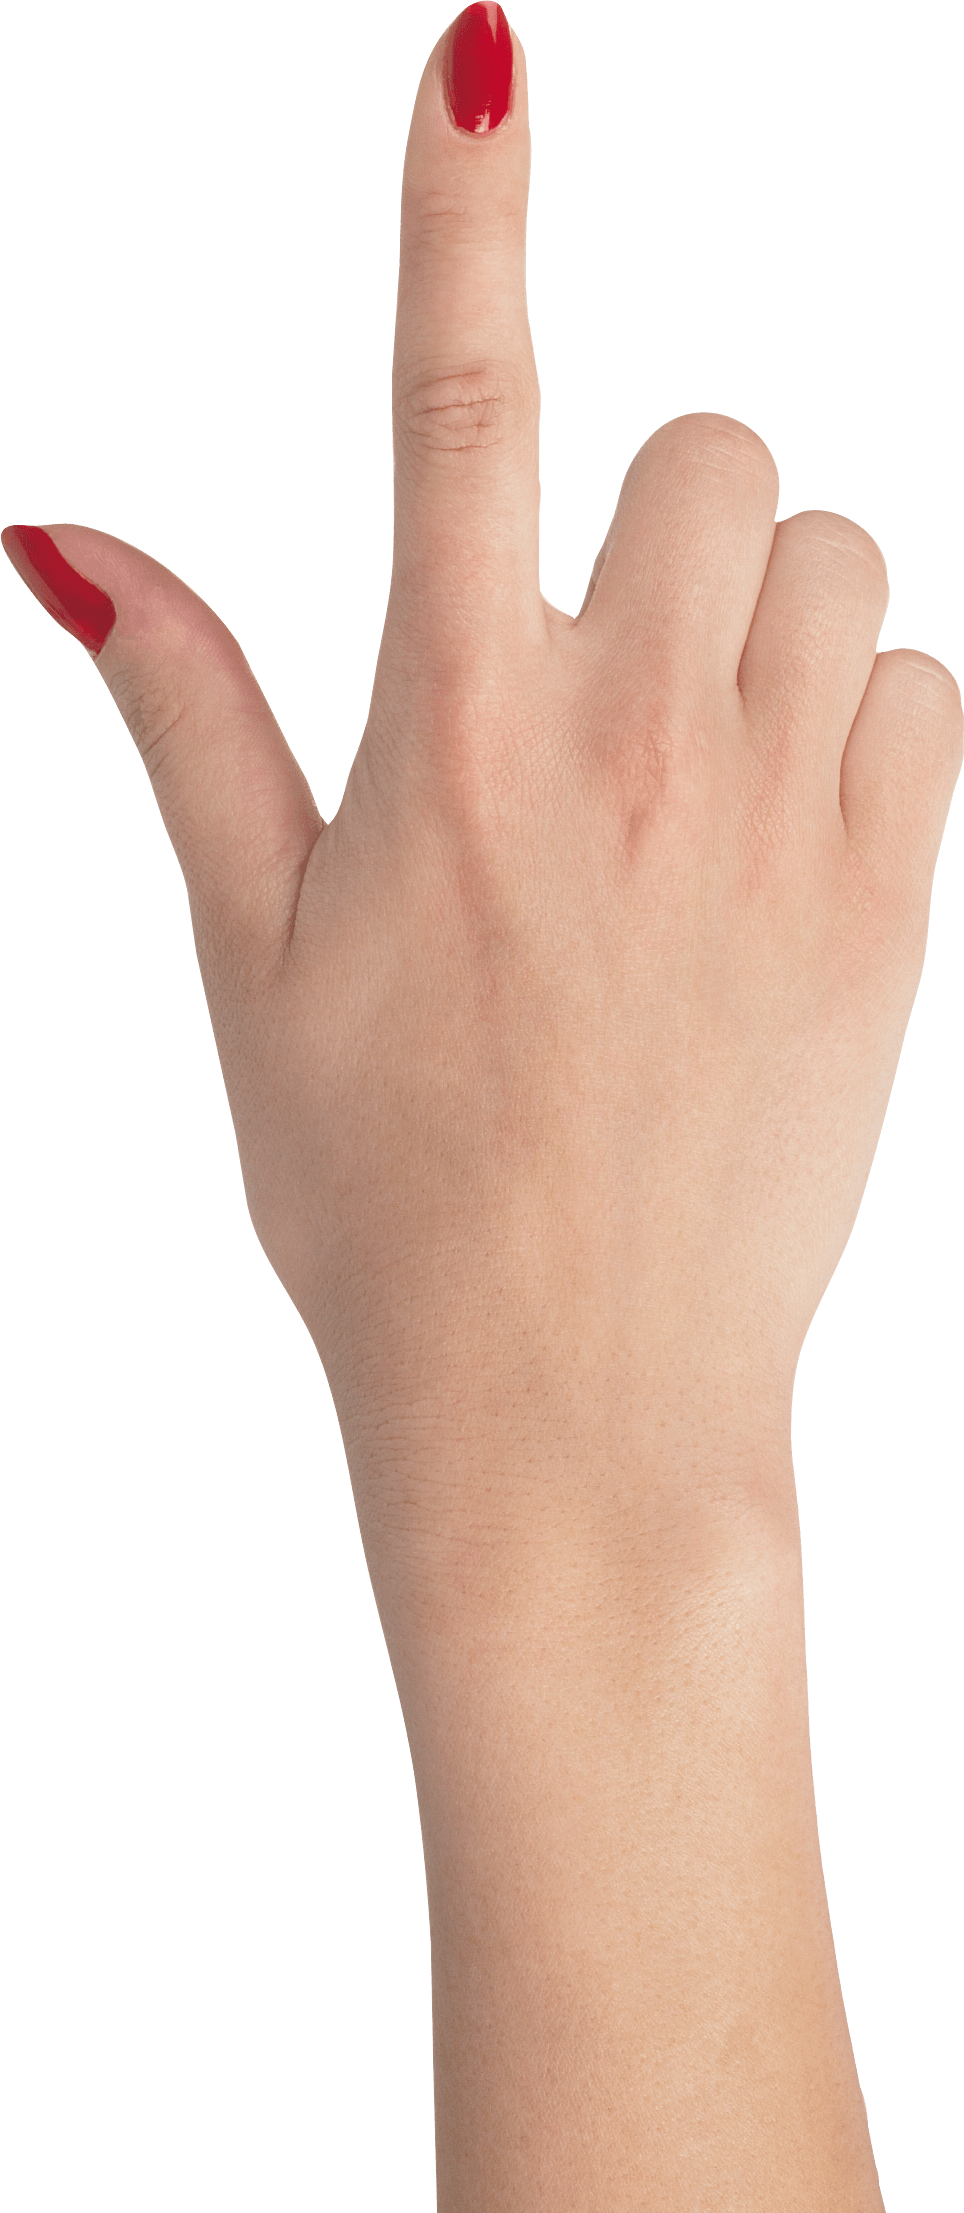 One Finger Hand With Red Nails Hands Png Hand Image  PNG Image